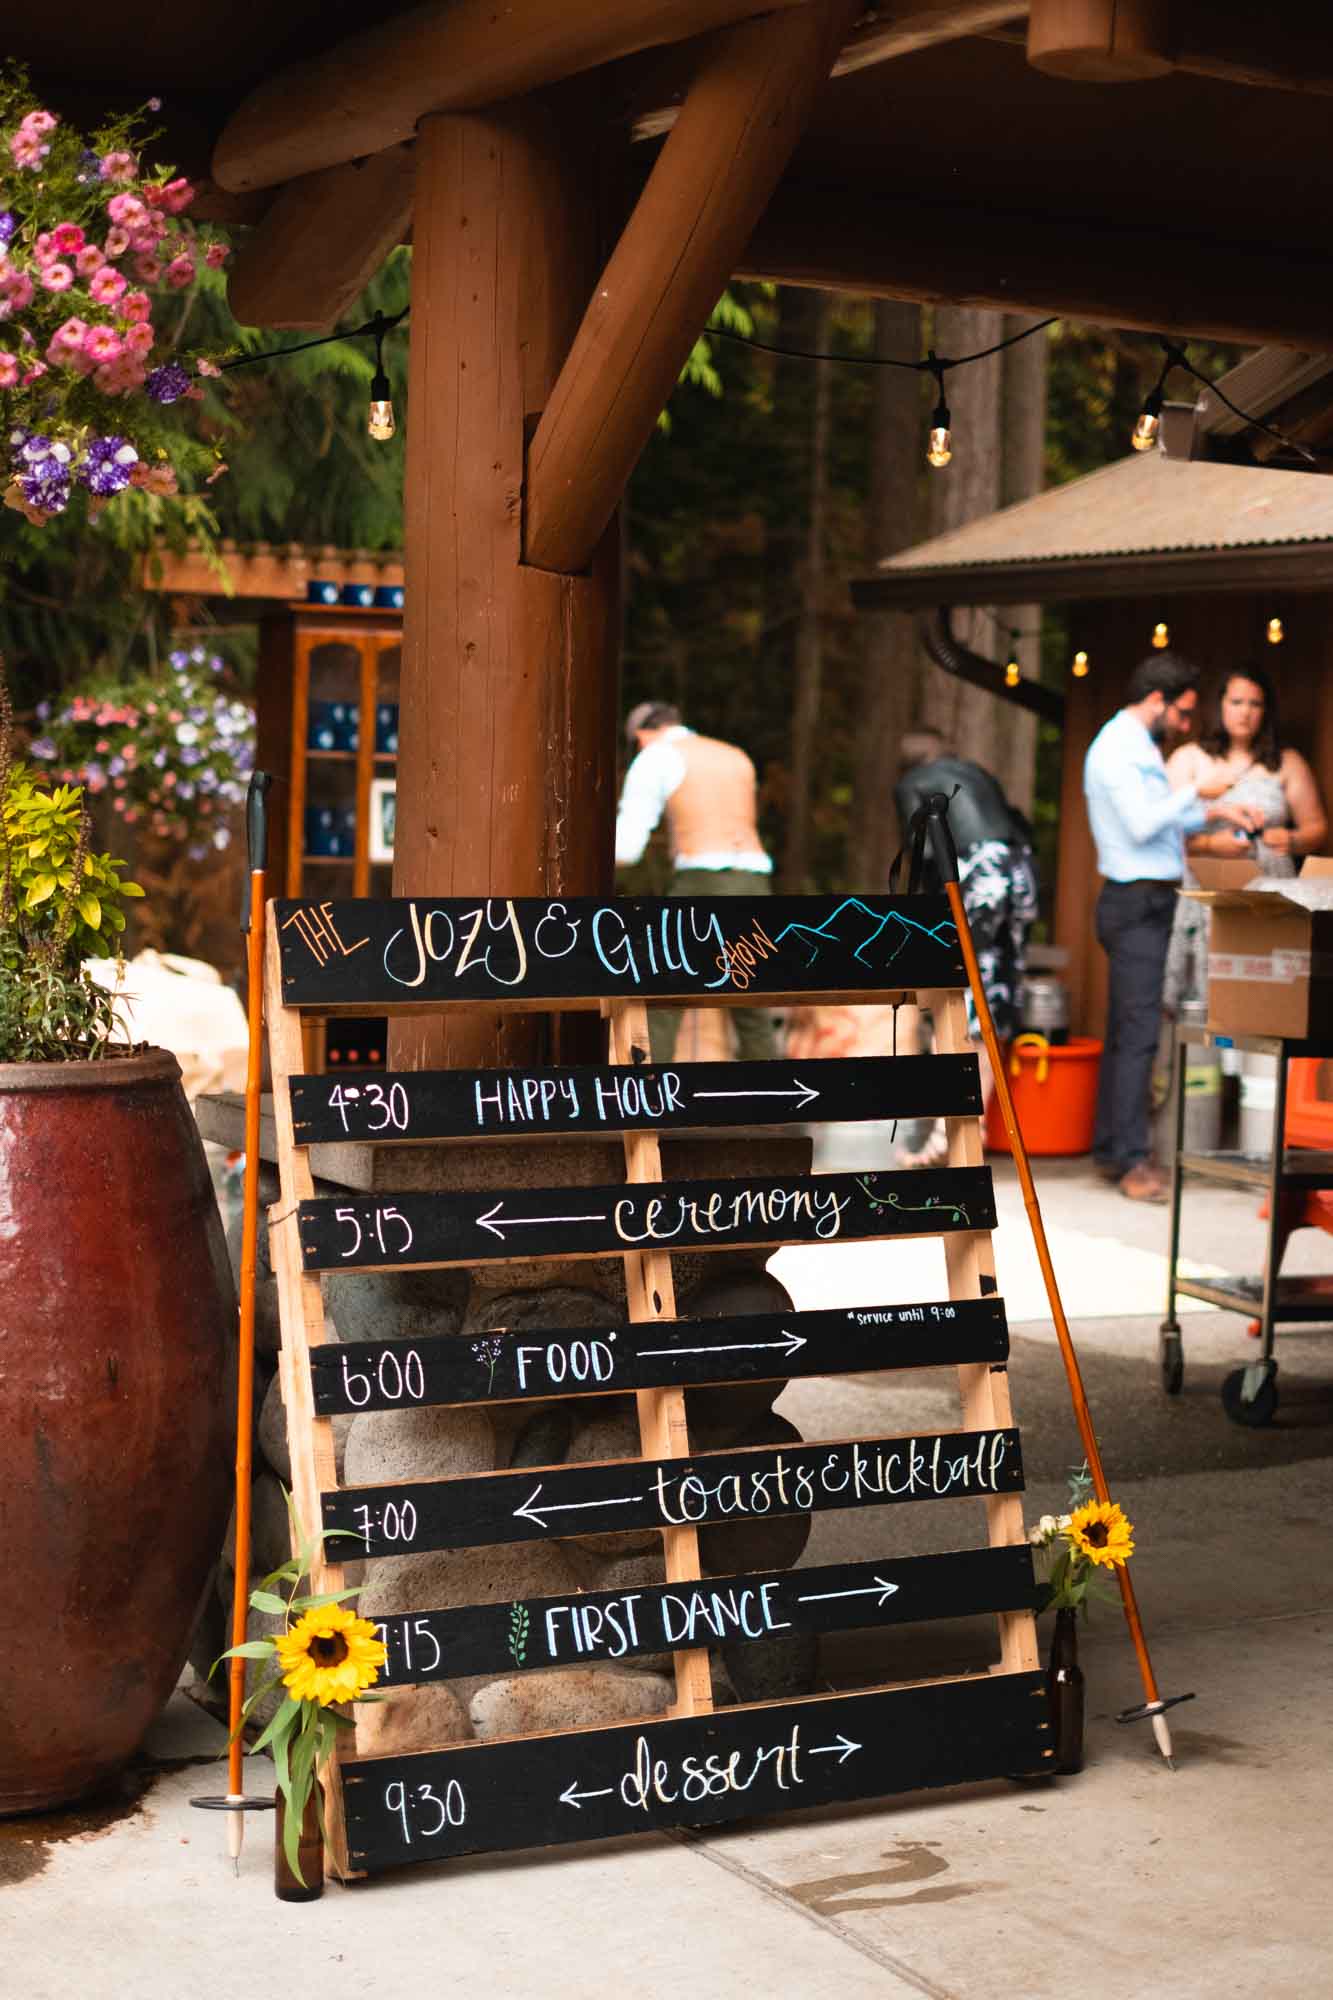 Yard Games, Dogs, and Homemade Pies At This Laid Back, DIY Washington Wedding | Best Northwest Photography | Featured on Equally Wed, the leading LGBTQ+ wedding magazine 